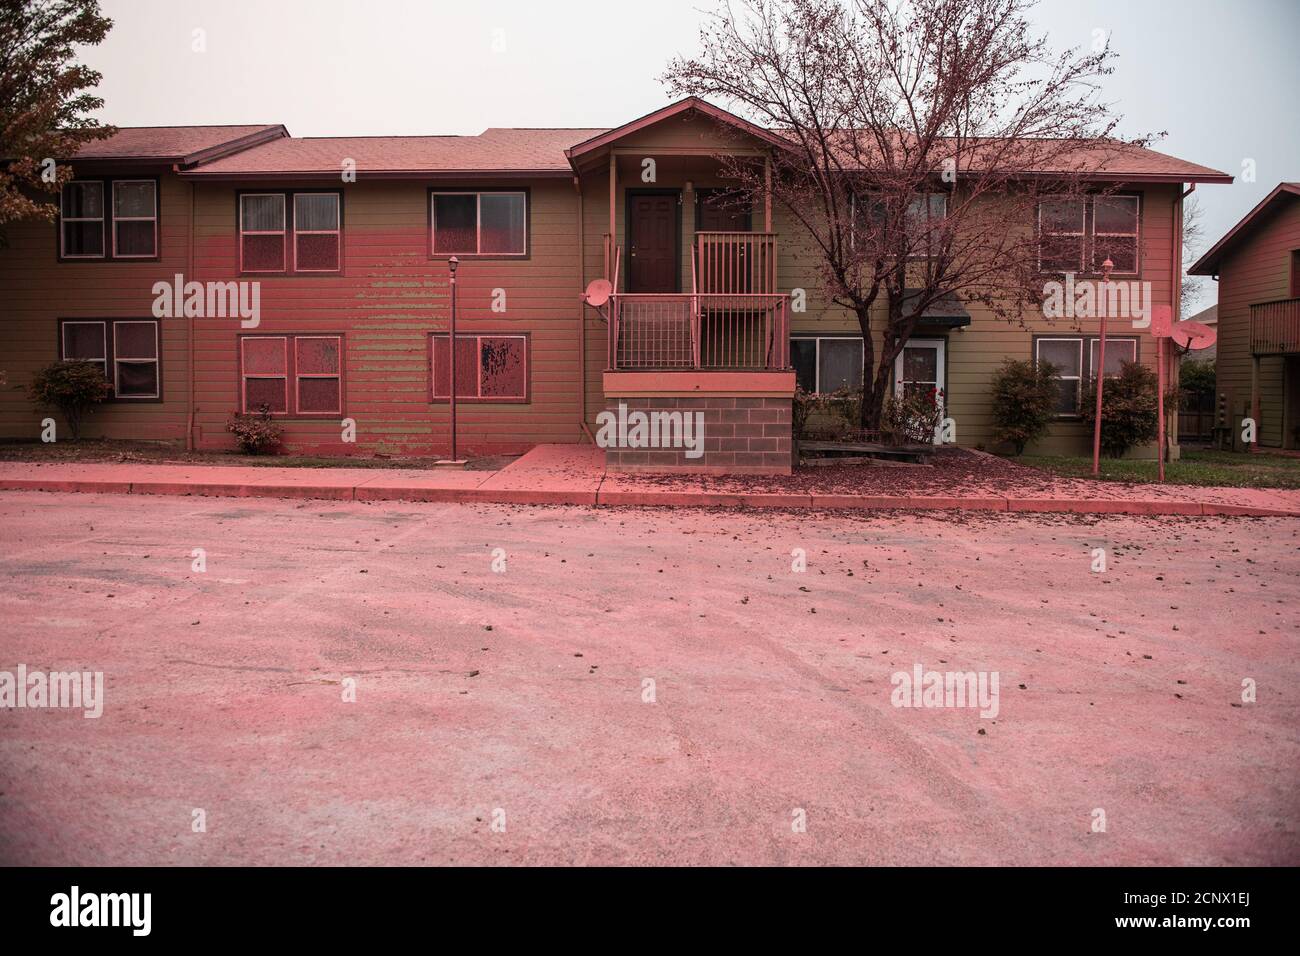 TALENT, ORE - SEPTEMBER 18, 2020: A general view of the Anderson Vista Apartments which were sprayed with fire retardent during the Almeda Fire. The town of Talent, Oregon, showing the burned out homes, cars and rubble left behind. In Talent, about 20 miles north of the California border, homes were charred beyond recognition. Across the western US, at least 87 wildfires are burning, according to the National Interagency Fire Center. They've torched more than 4.7 million acres -- more than six times the area of Rhode Island. Credit: Chris Tuite/imageSPACE Stock Photo